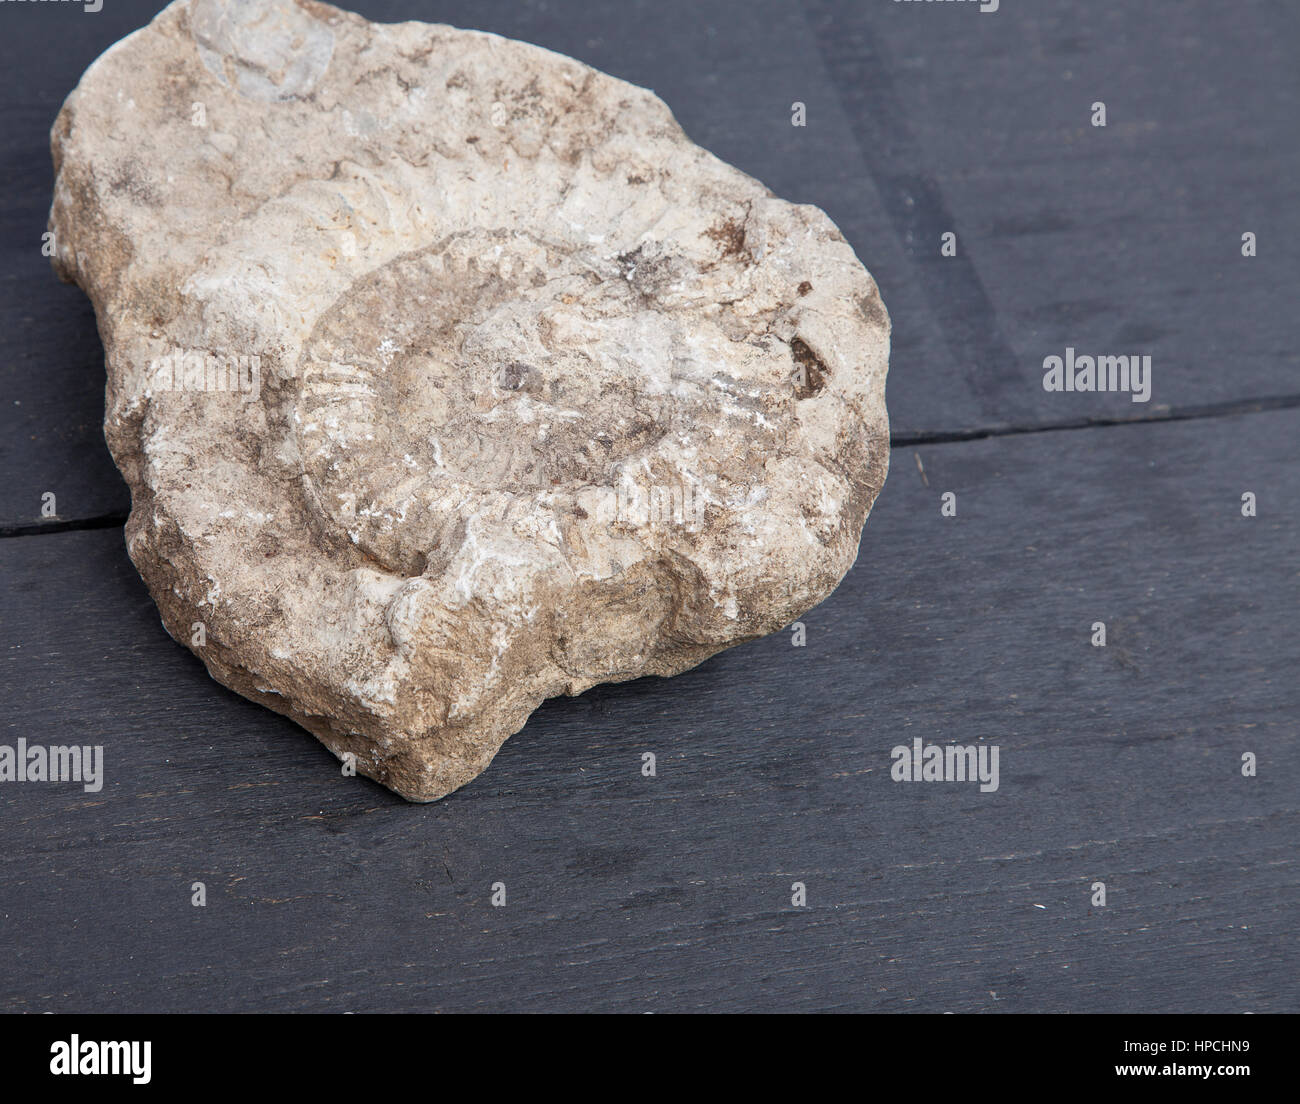 Nautilus fossil in stone on wooden background Stock Photo